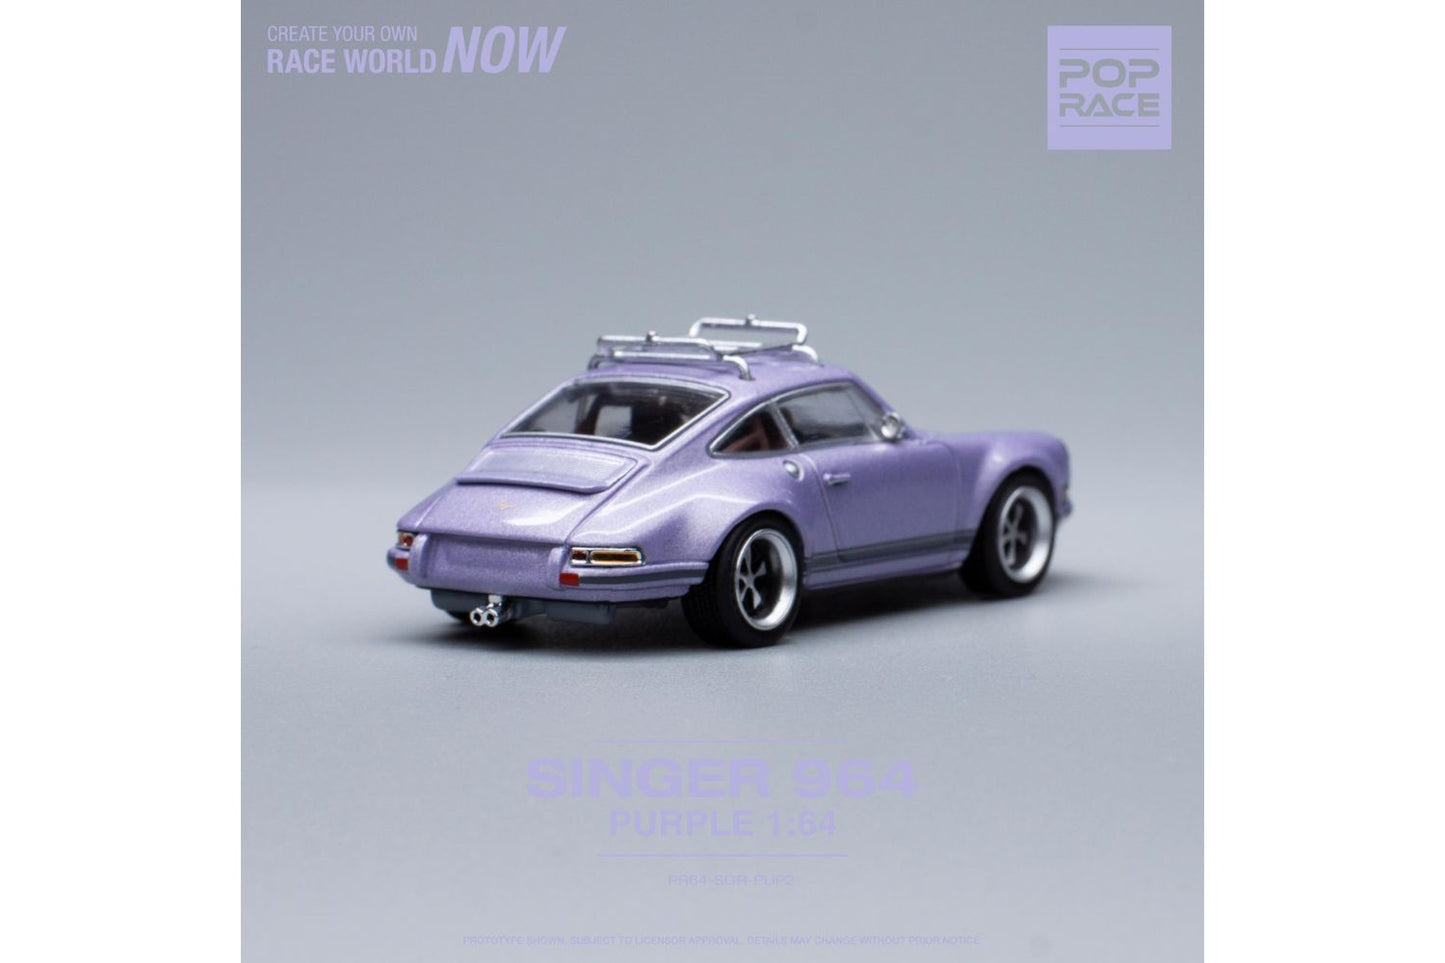 Pop Race 1/64 Singer Porsche 911 (964) in Purple with Roof Rack and Surf Boards